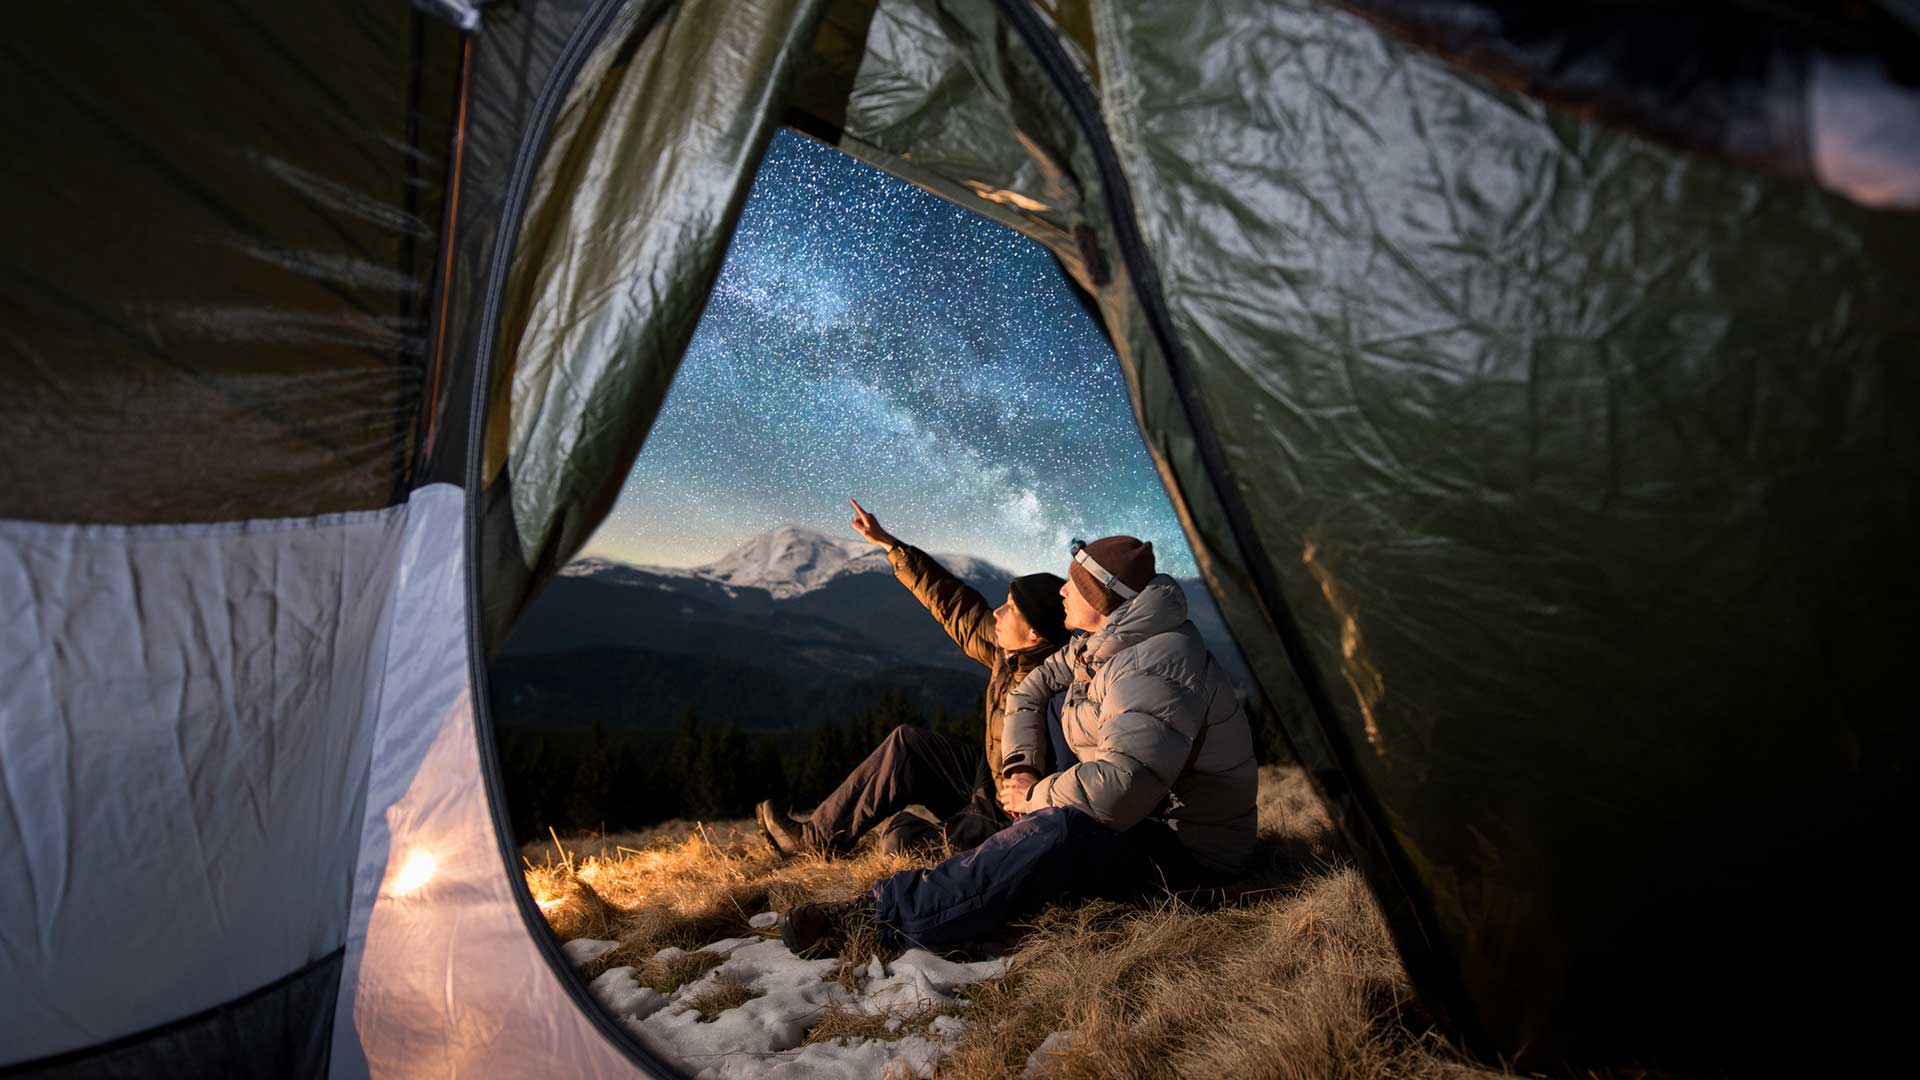 People camp under the night sky